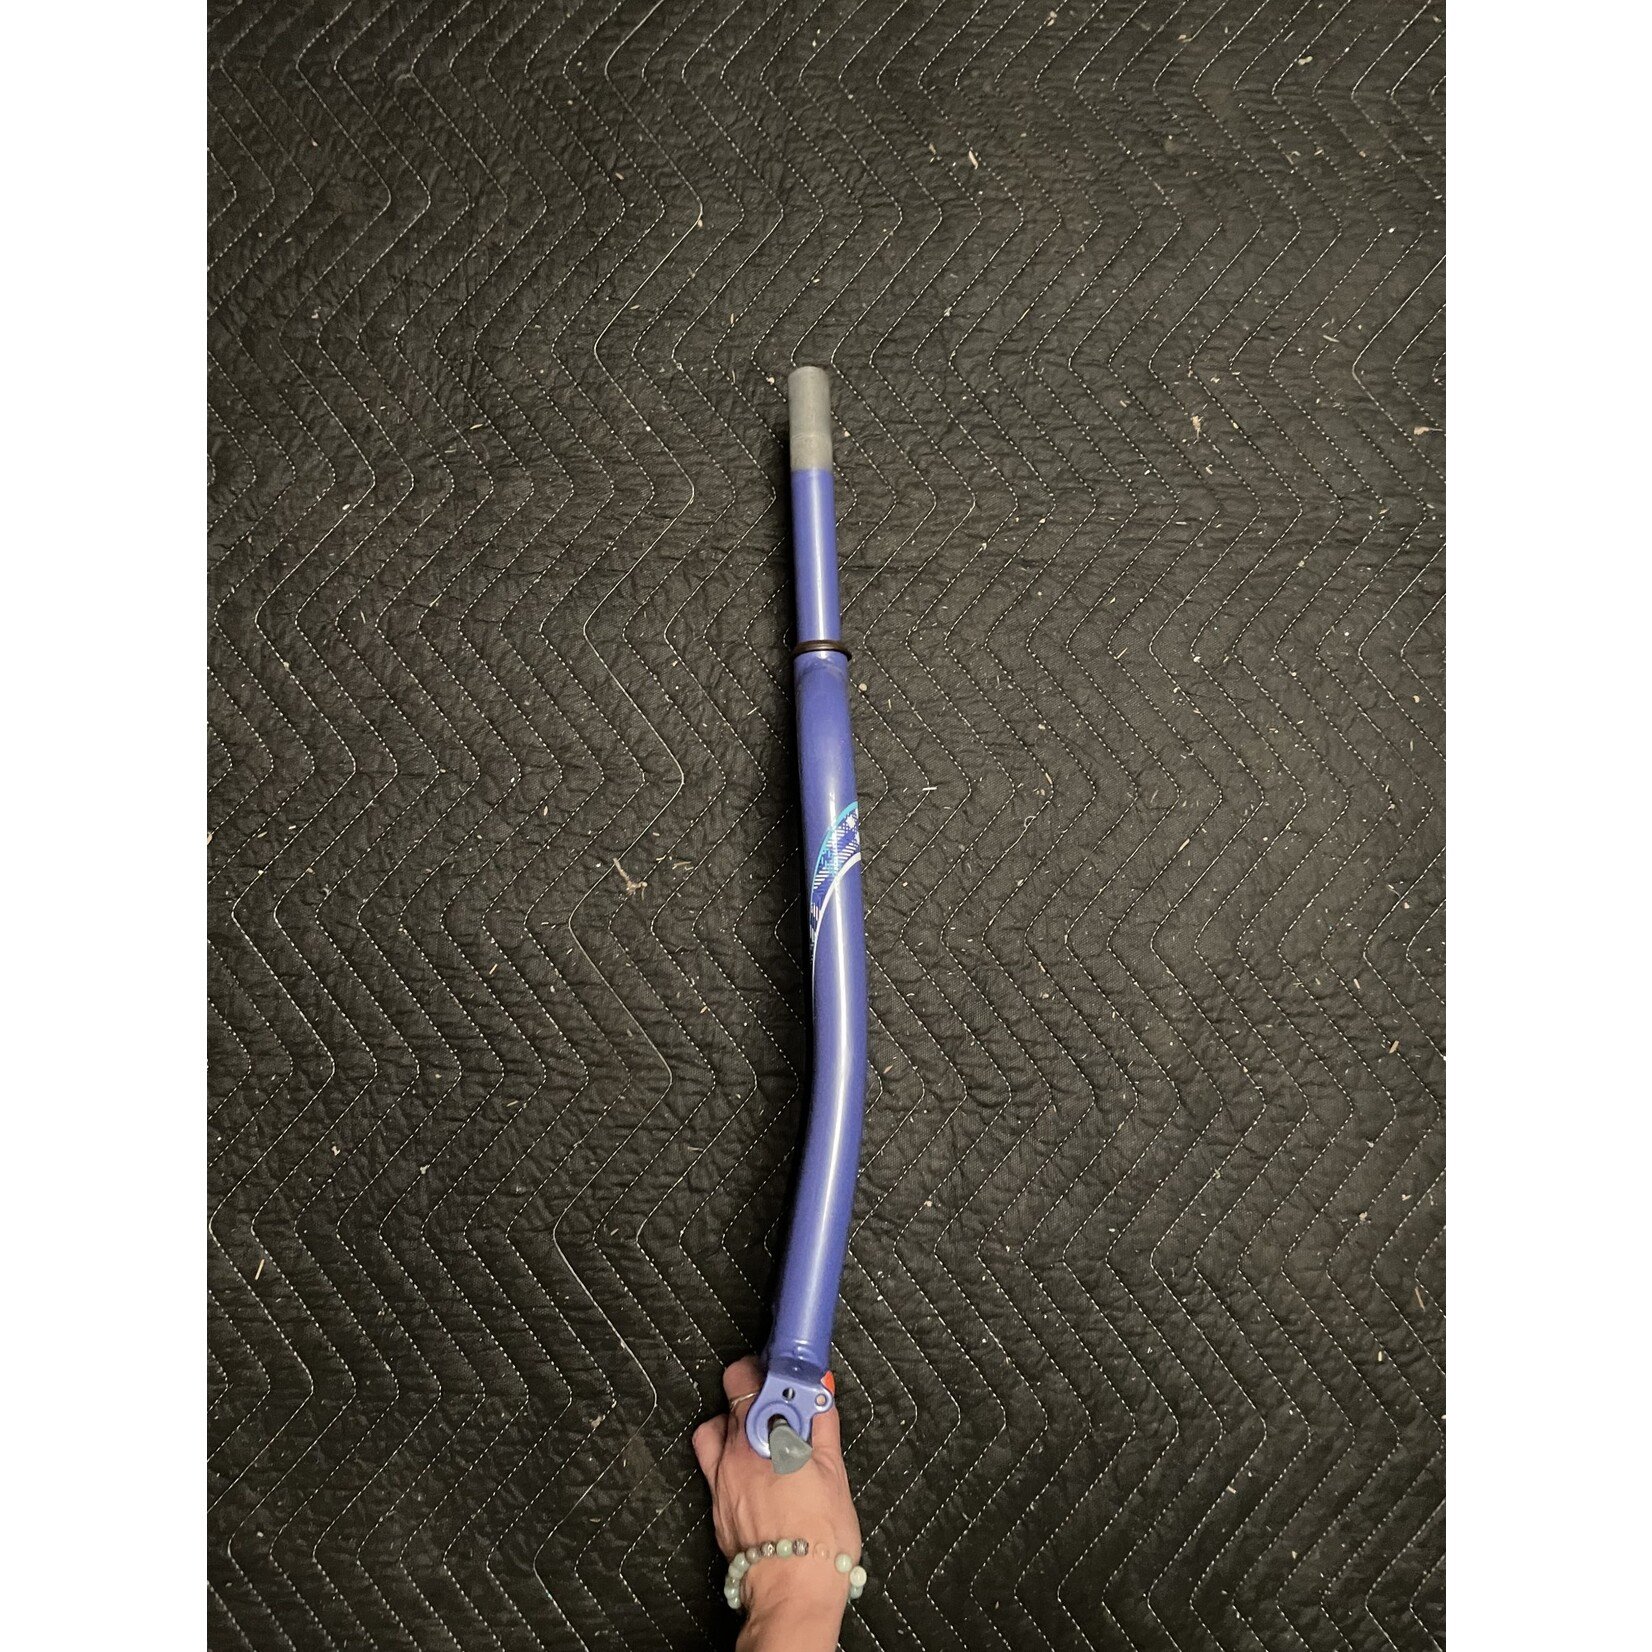 1” x 6 3/4” Threadless 26” Bicycle Fork (Periwinkle & Plaid)